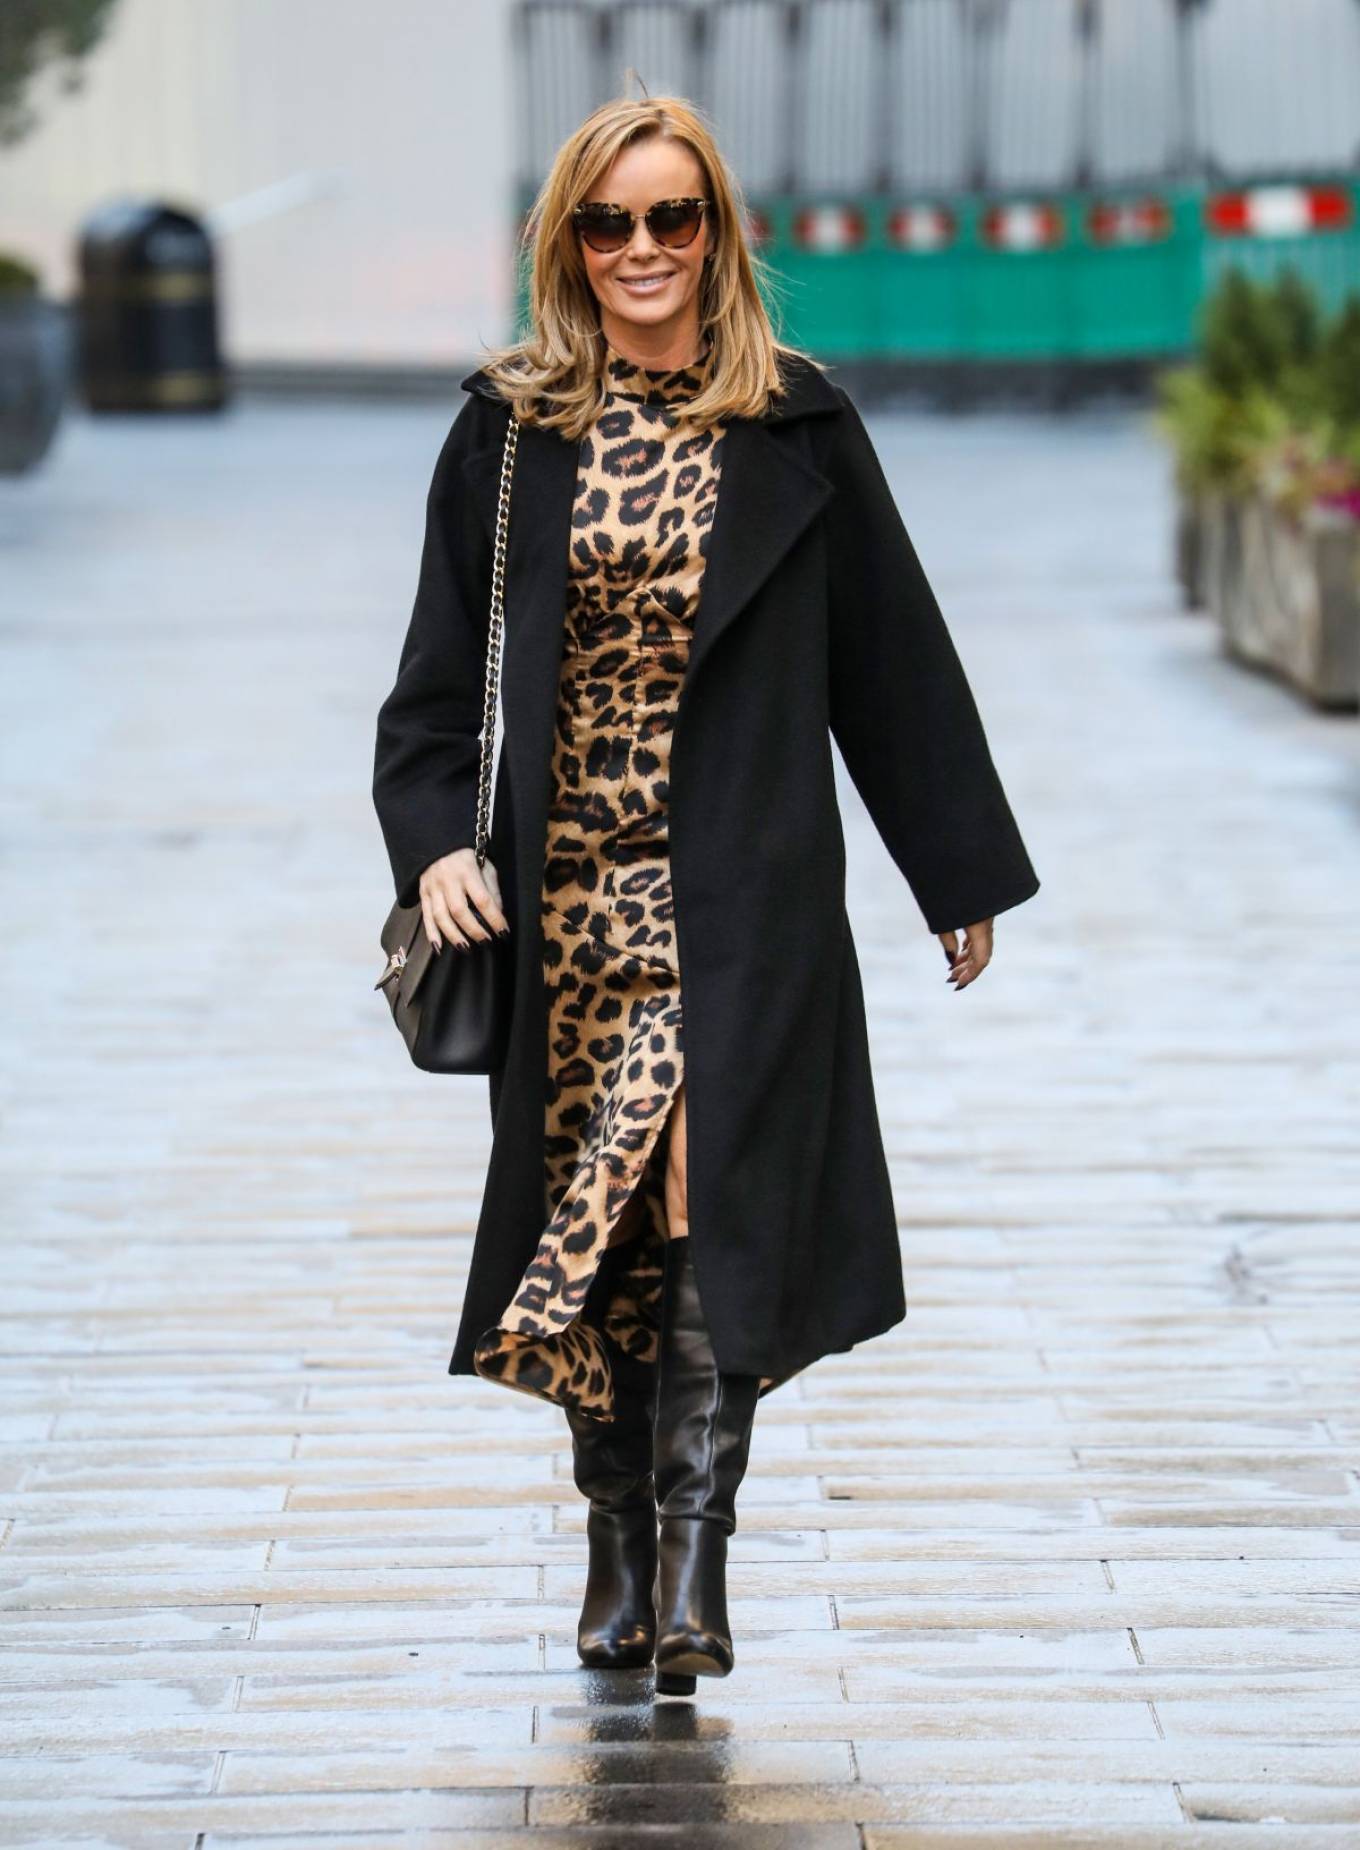 Amanda Holden 2020 : Amanda Holden – out and about in London -08